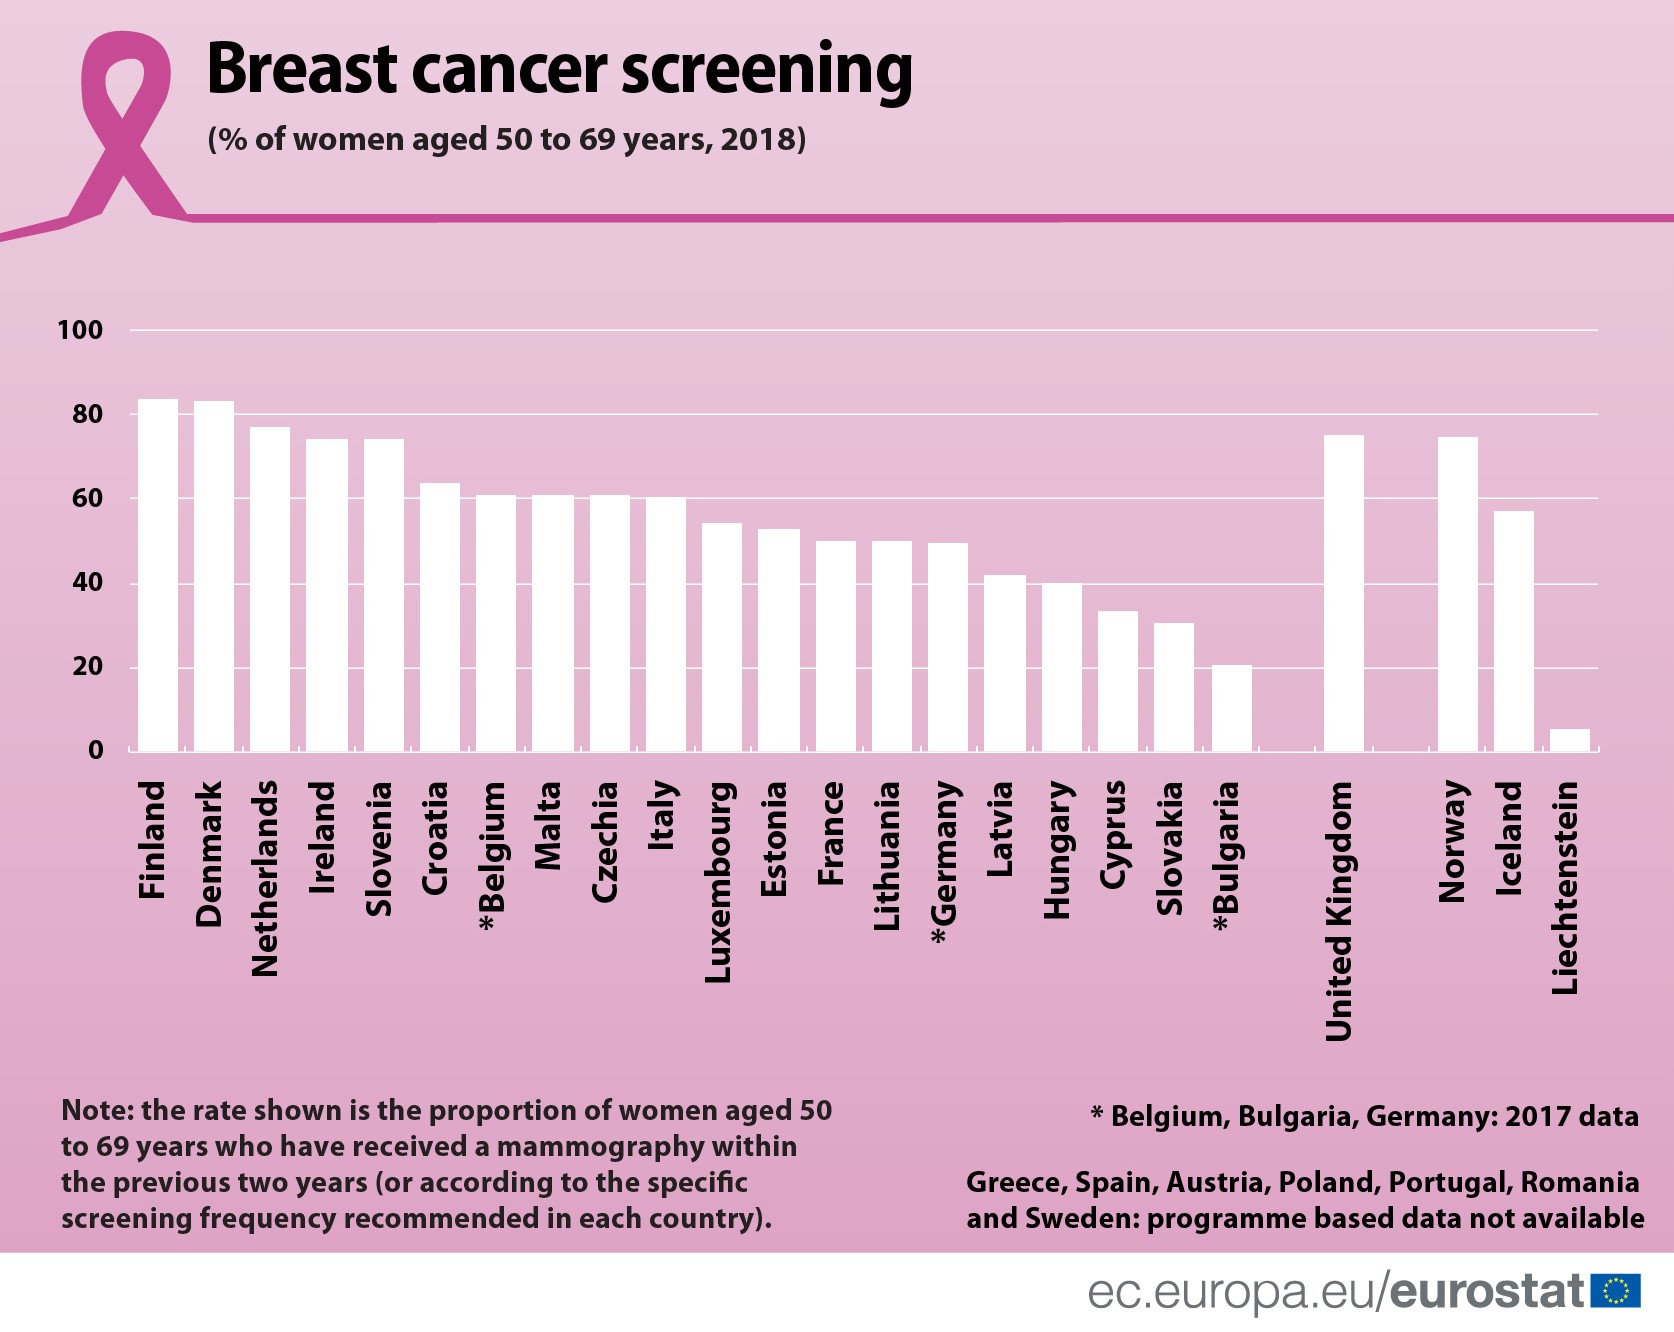 Breast cancer screening differs among Member States Products Eurostat